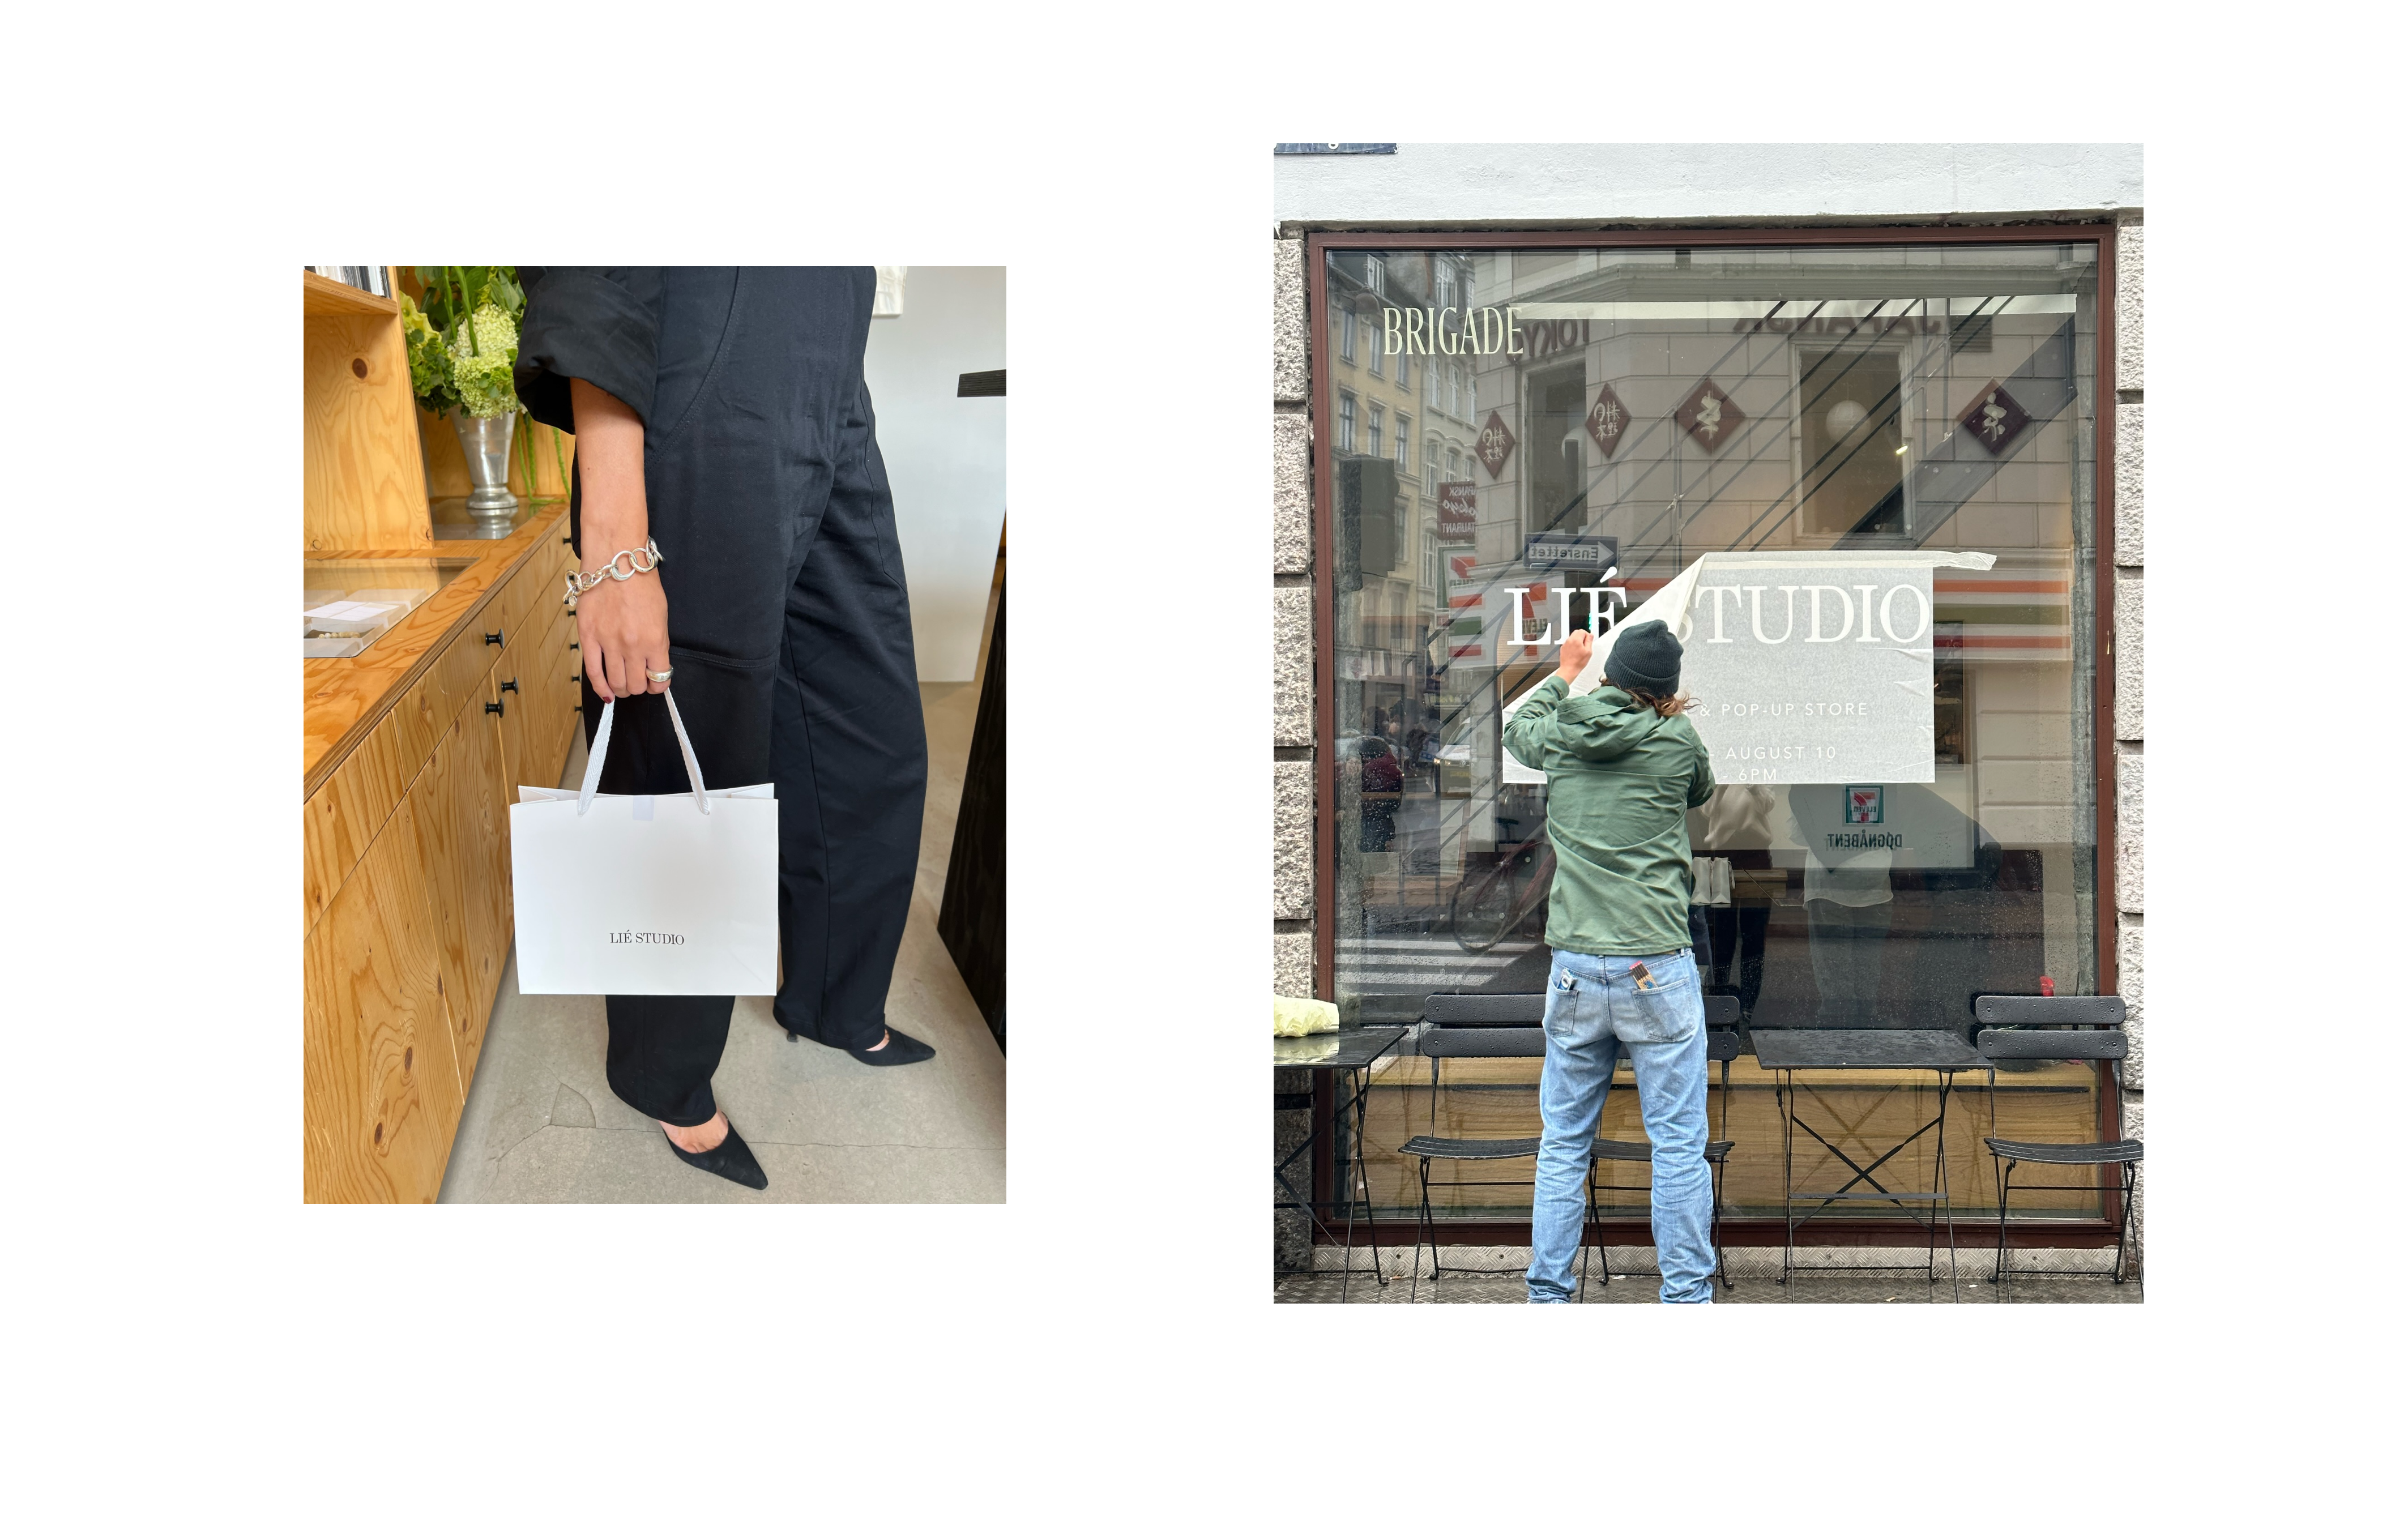 The LIÉ STUDIO shopping bag was exclusively available at the pop-up store 